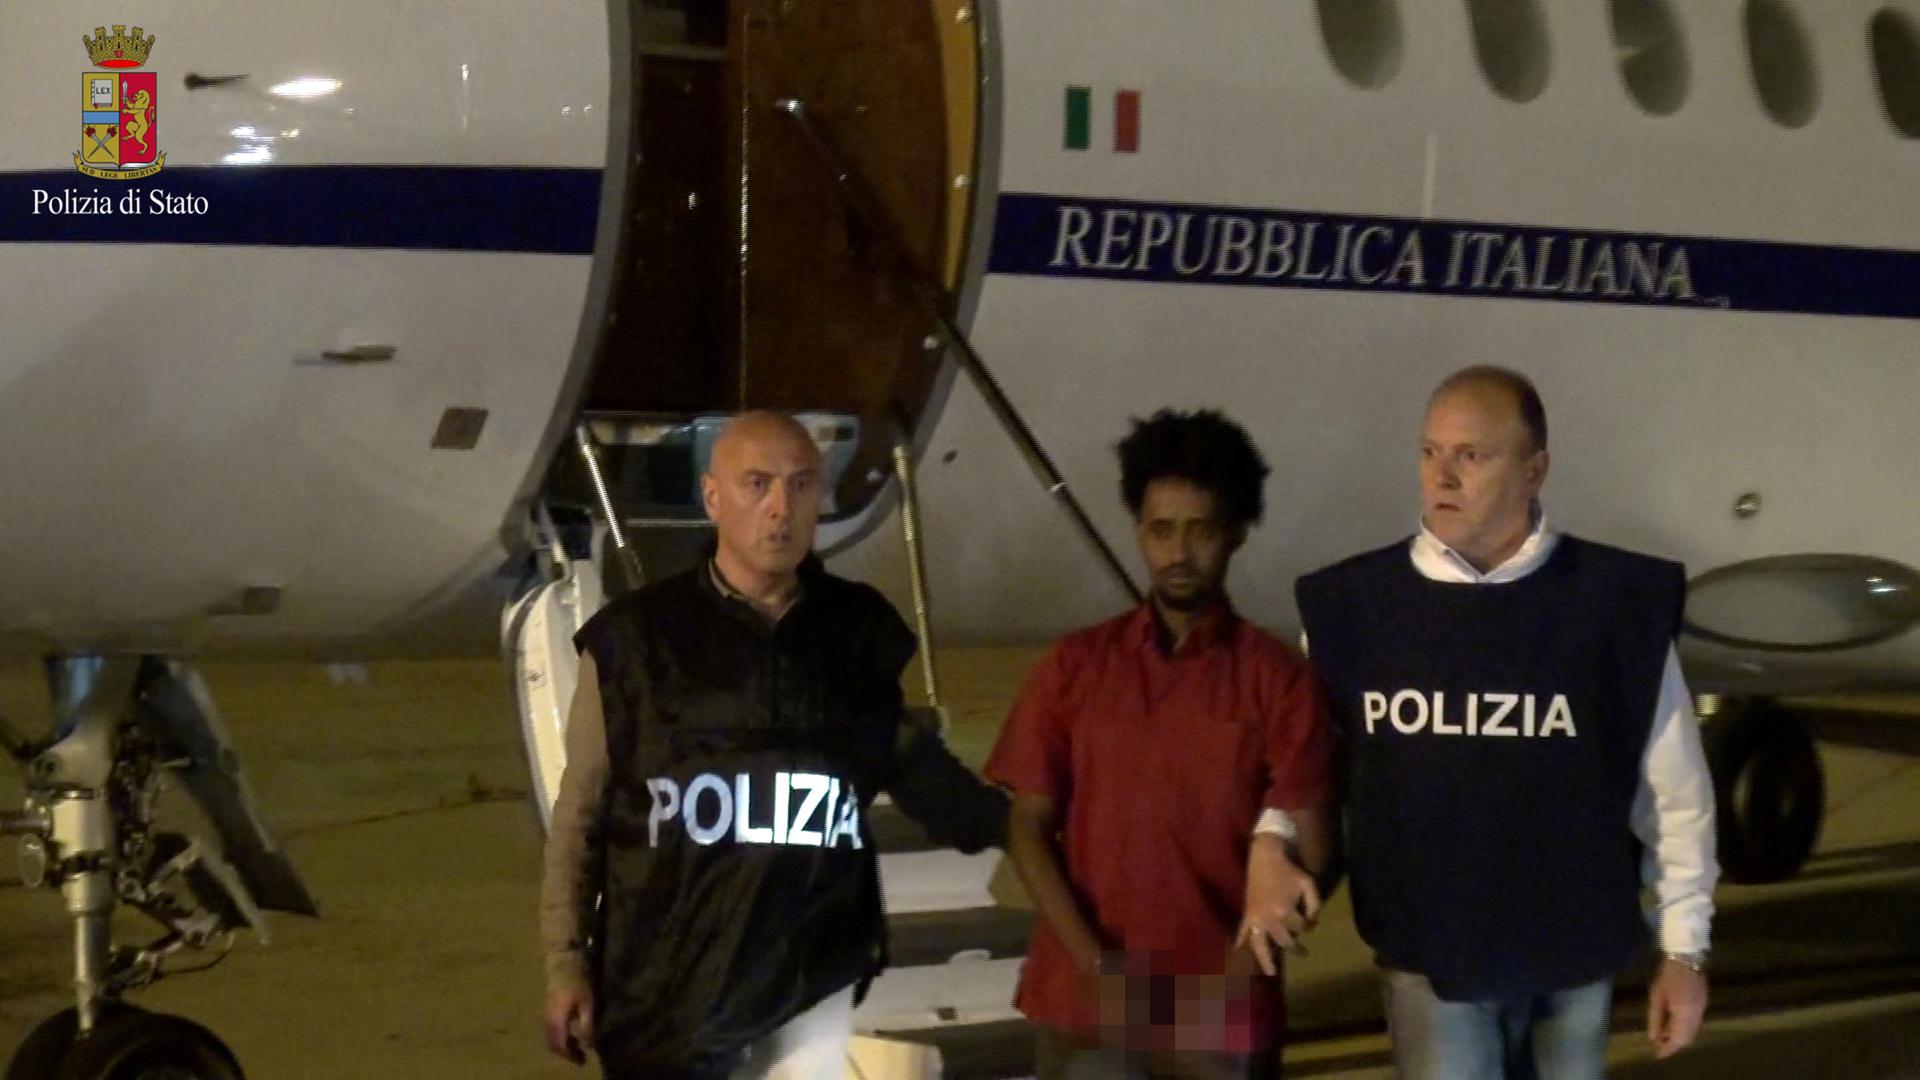 Medhanie Yehdego Mered, 35, is pictured with Italian policemen as they land at Palermo airport, Italy, following his arrest in Khartoum, Sudan, on May 24. The photo was released on June 8 by the Italian Police Department.